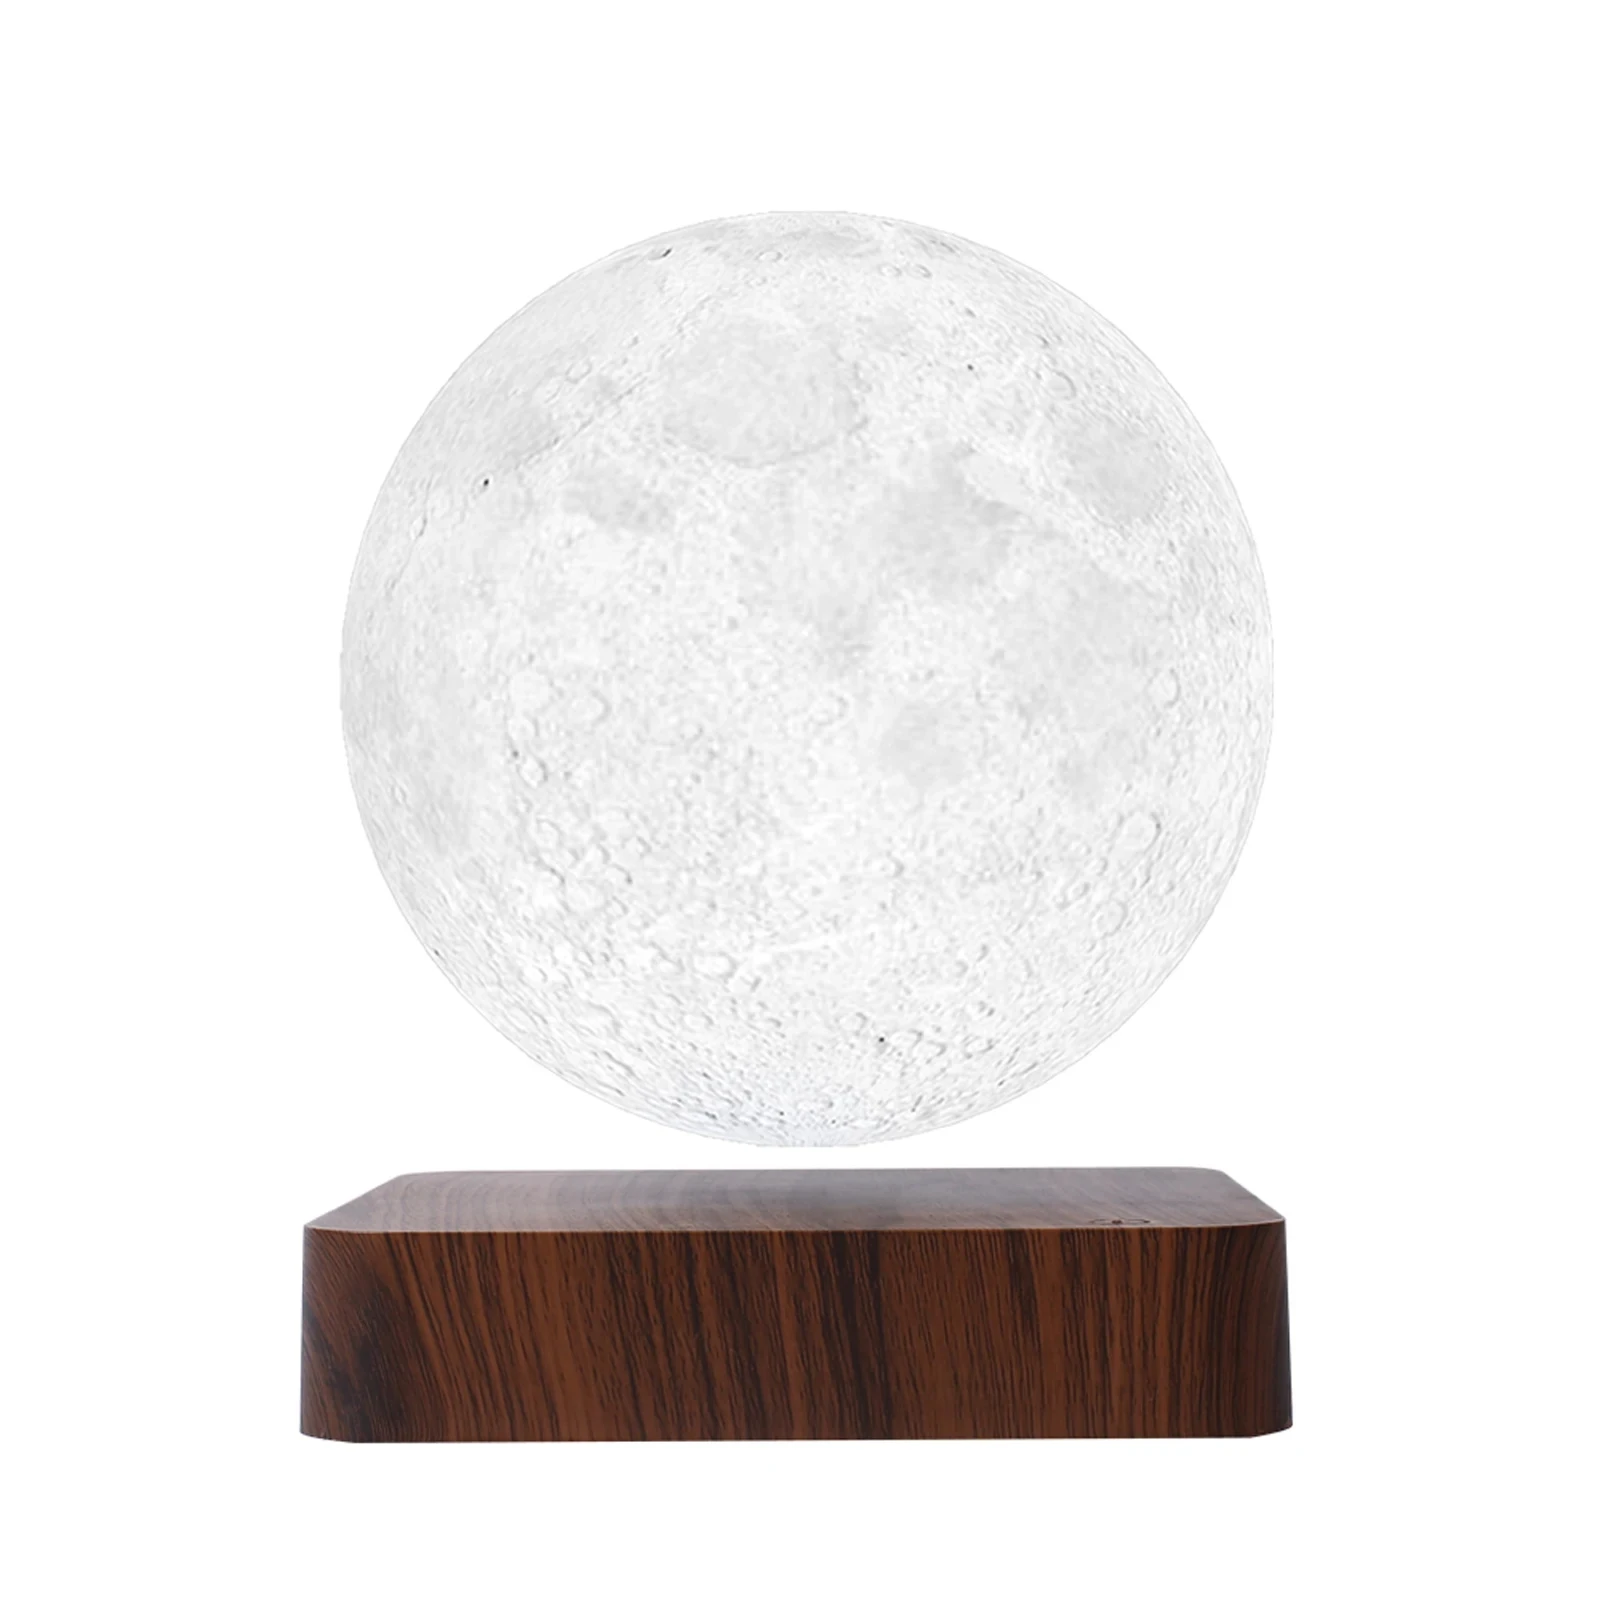 

New Indoor Desk Light Hot Sales Levitating Moon Lamp Creative Magnetic LED Night Light For Birthday Gift Business Gif Table Lamp